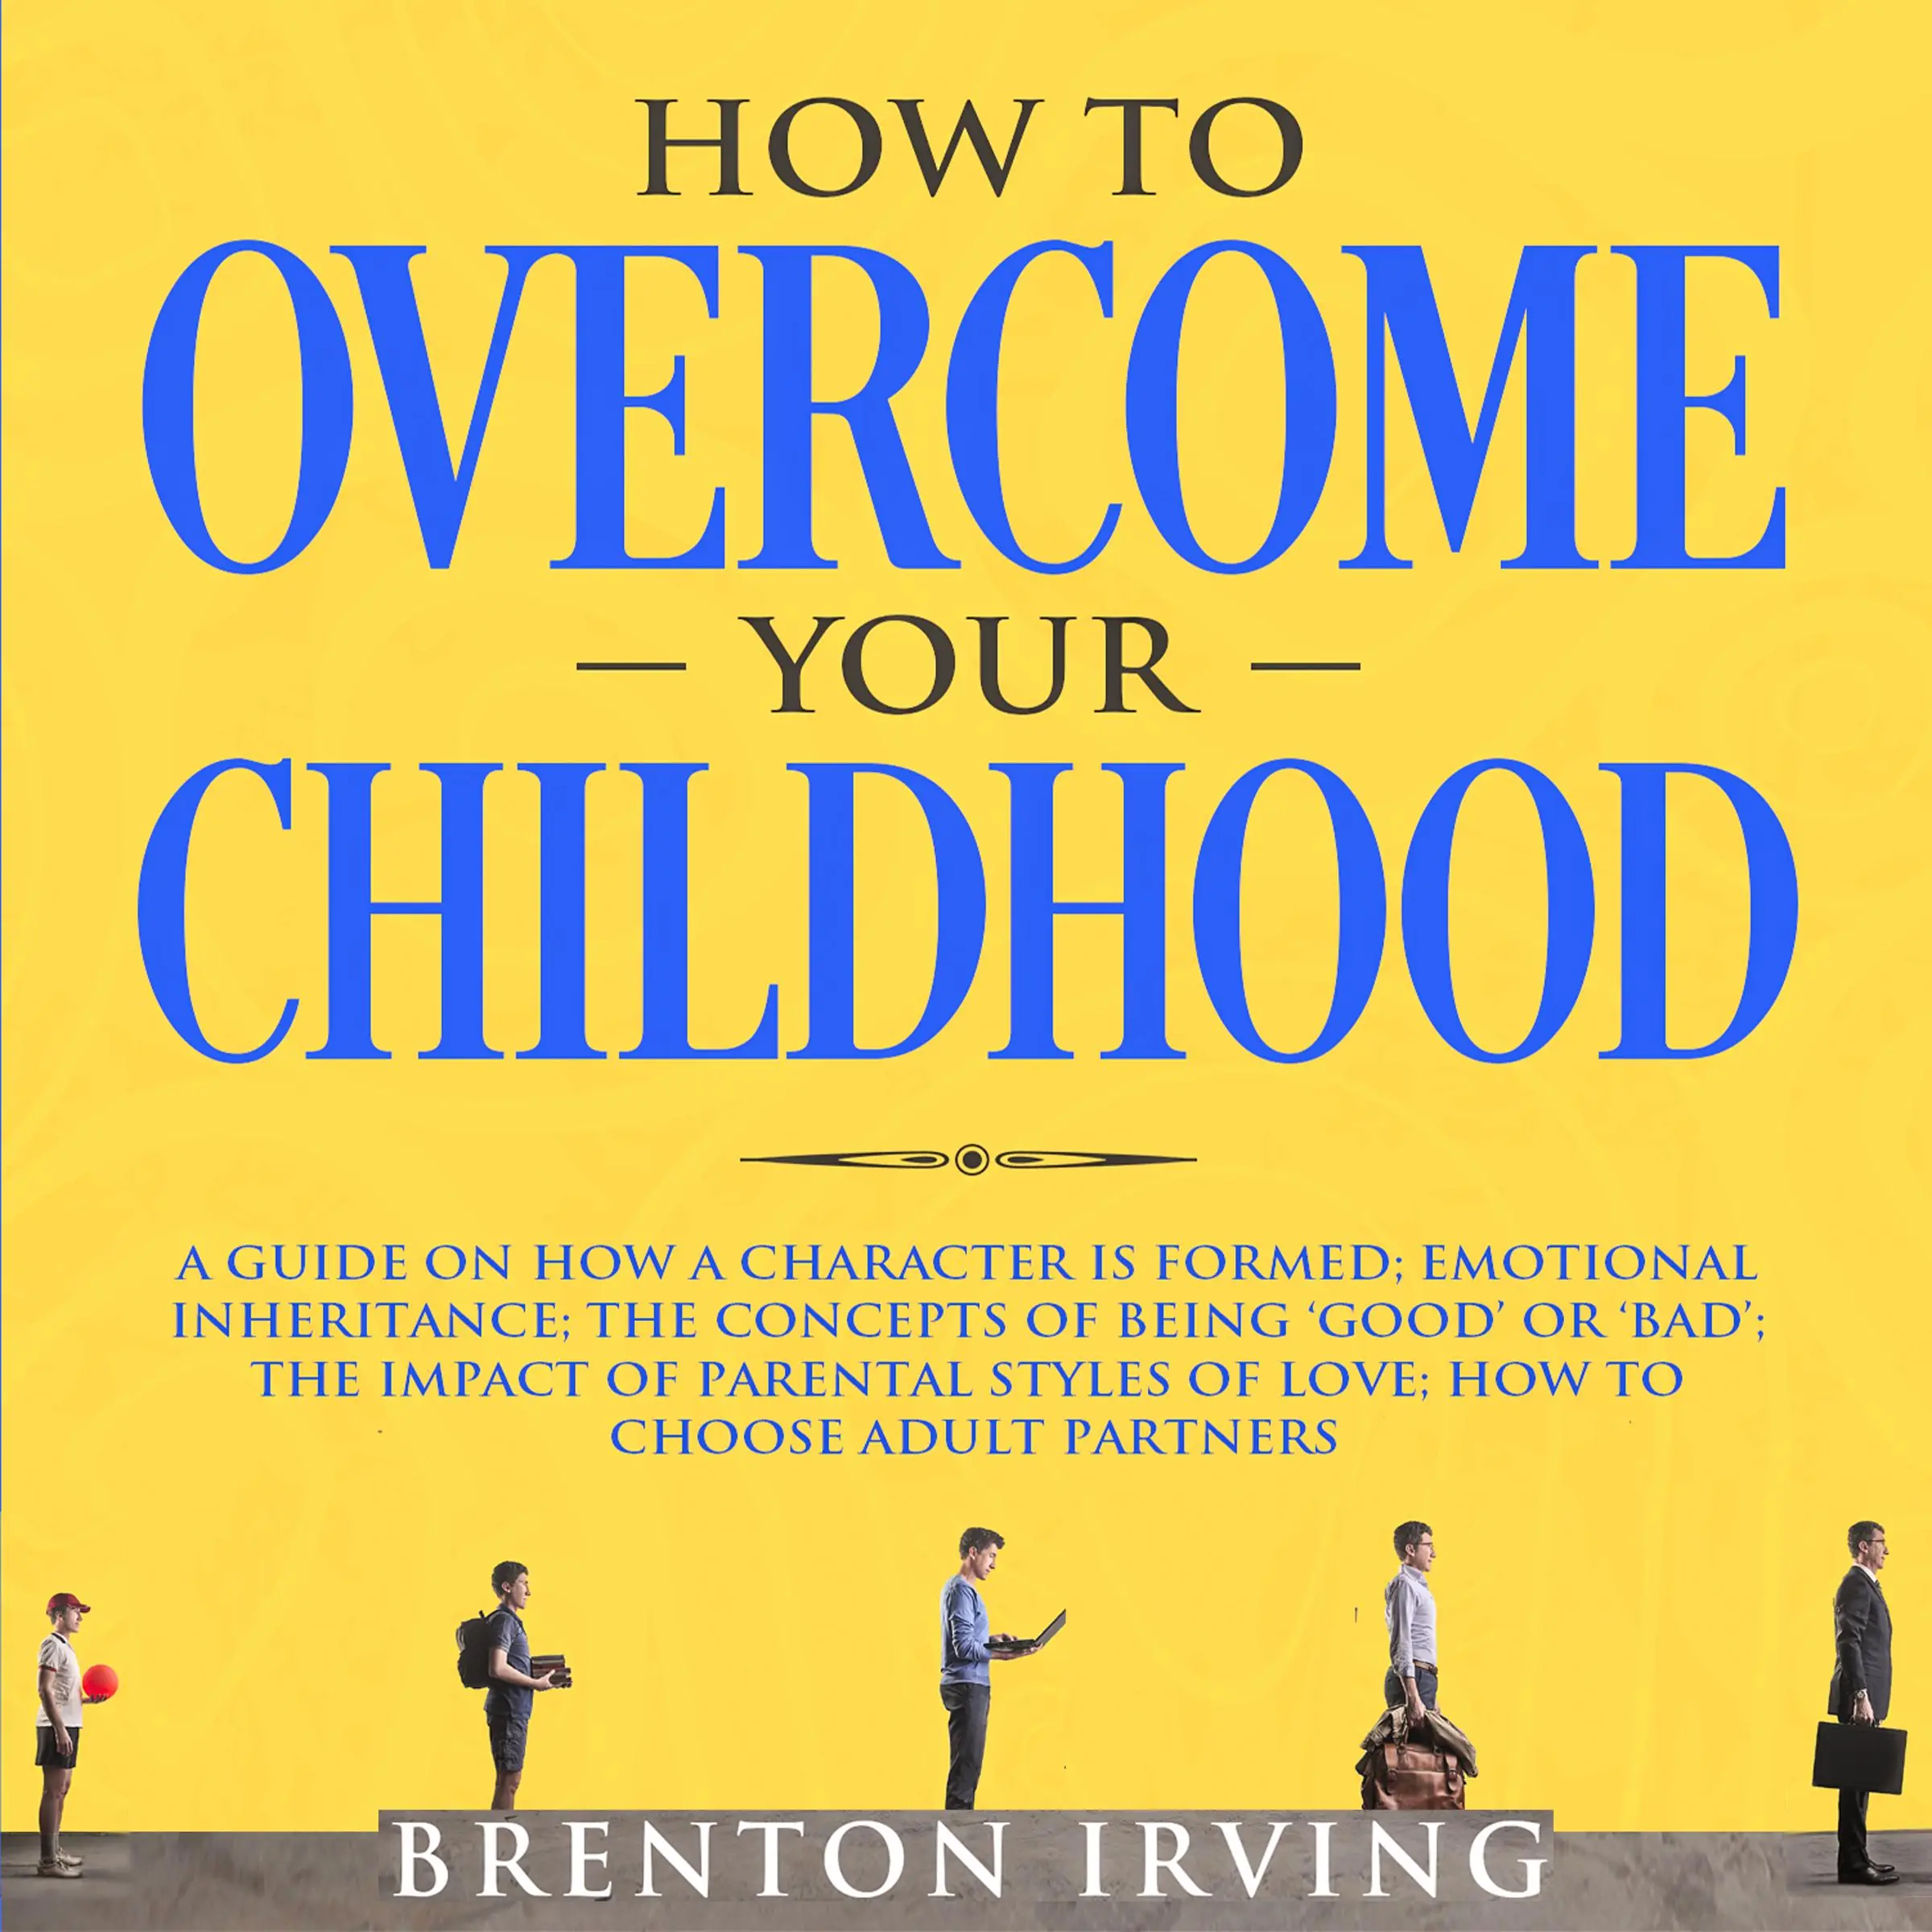 How to Overcome Your Childhood: A Guide on How a Character is Formed; Emotional Inheritance; the Concepts of Being ‘Good’ or ‘Bad’; the Impact of Parental Styles of Love; How to Choose Adult partners Audiobook by Brenton Irving